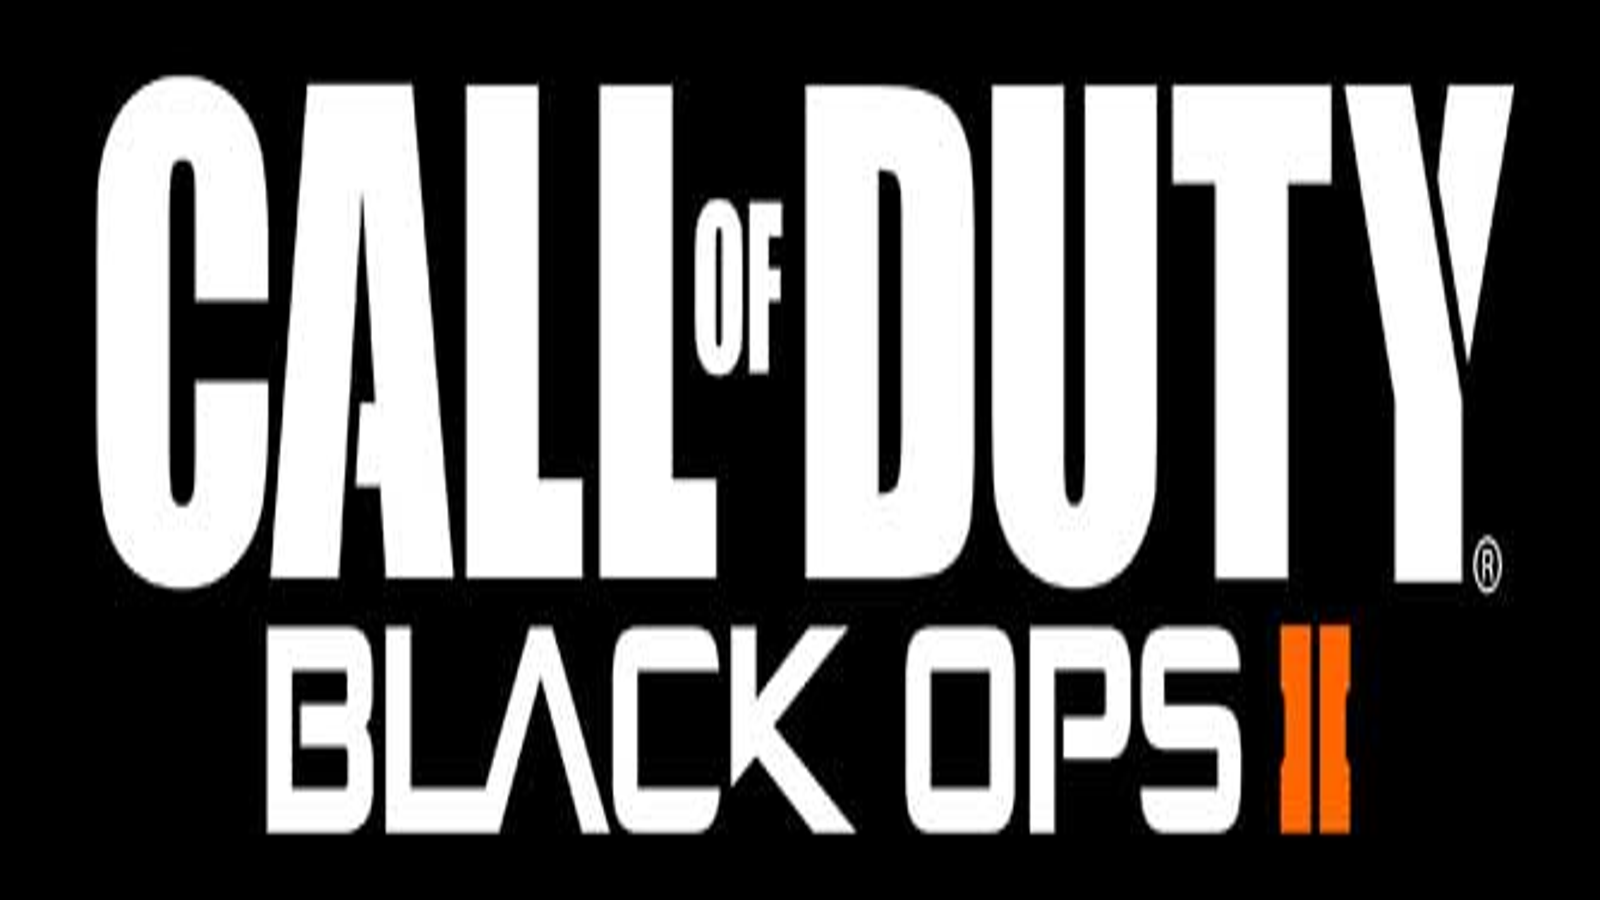 Call of Duty Black Ops 2 UPDATE - More GREAT news for Xbox One